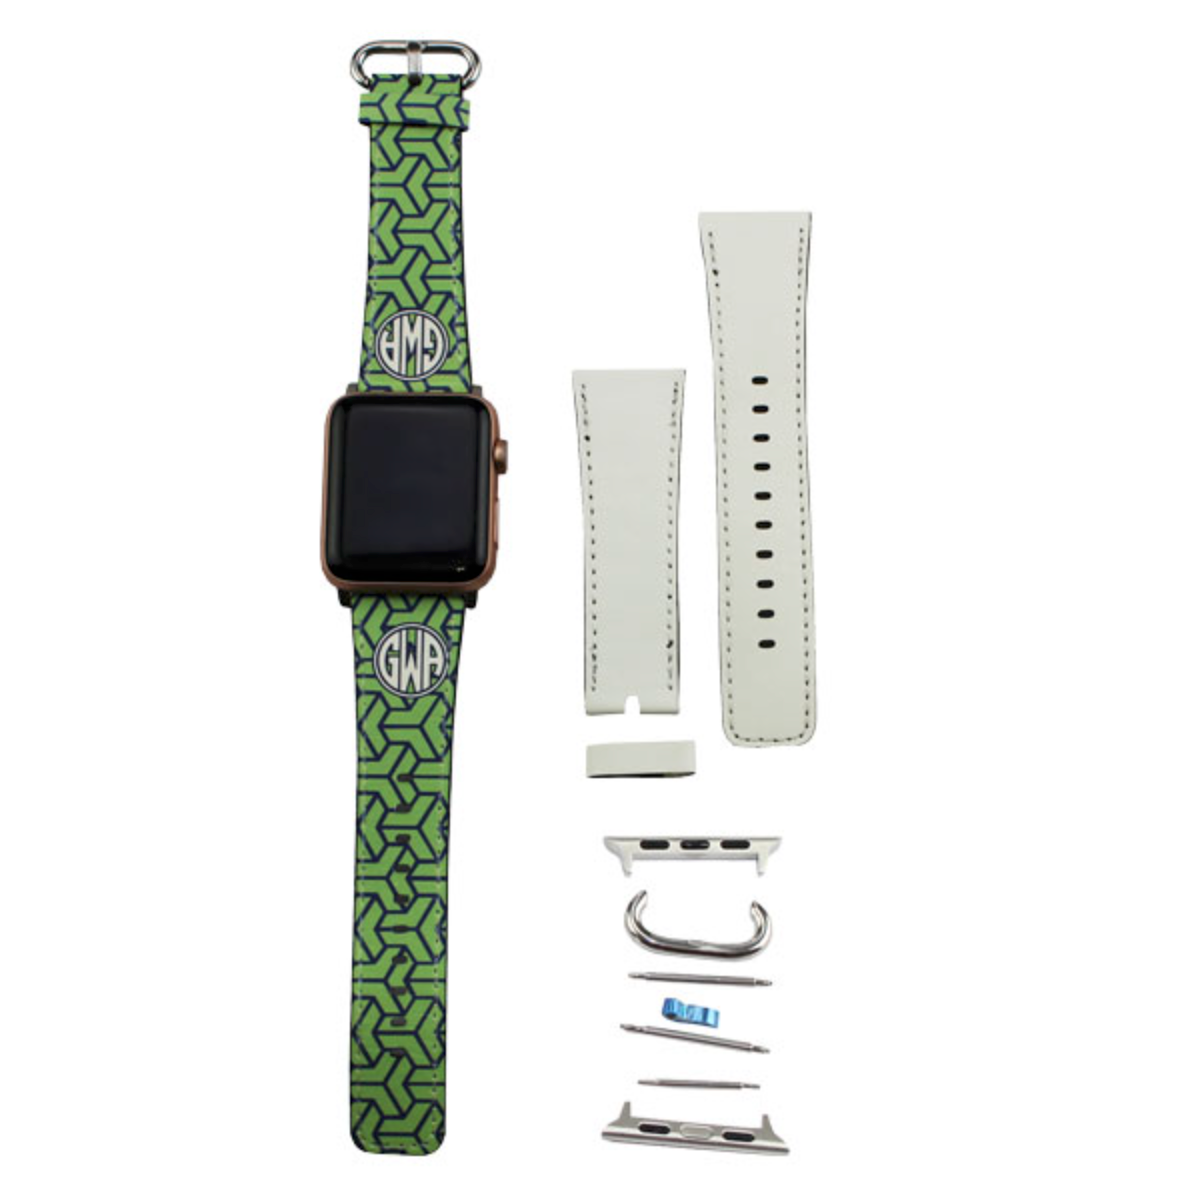 iPhone Watch Bands